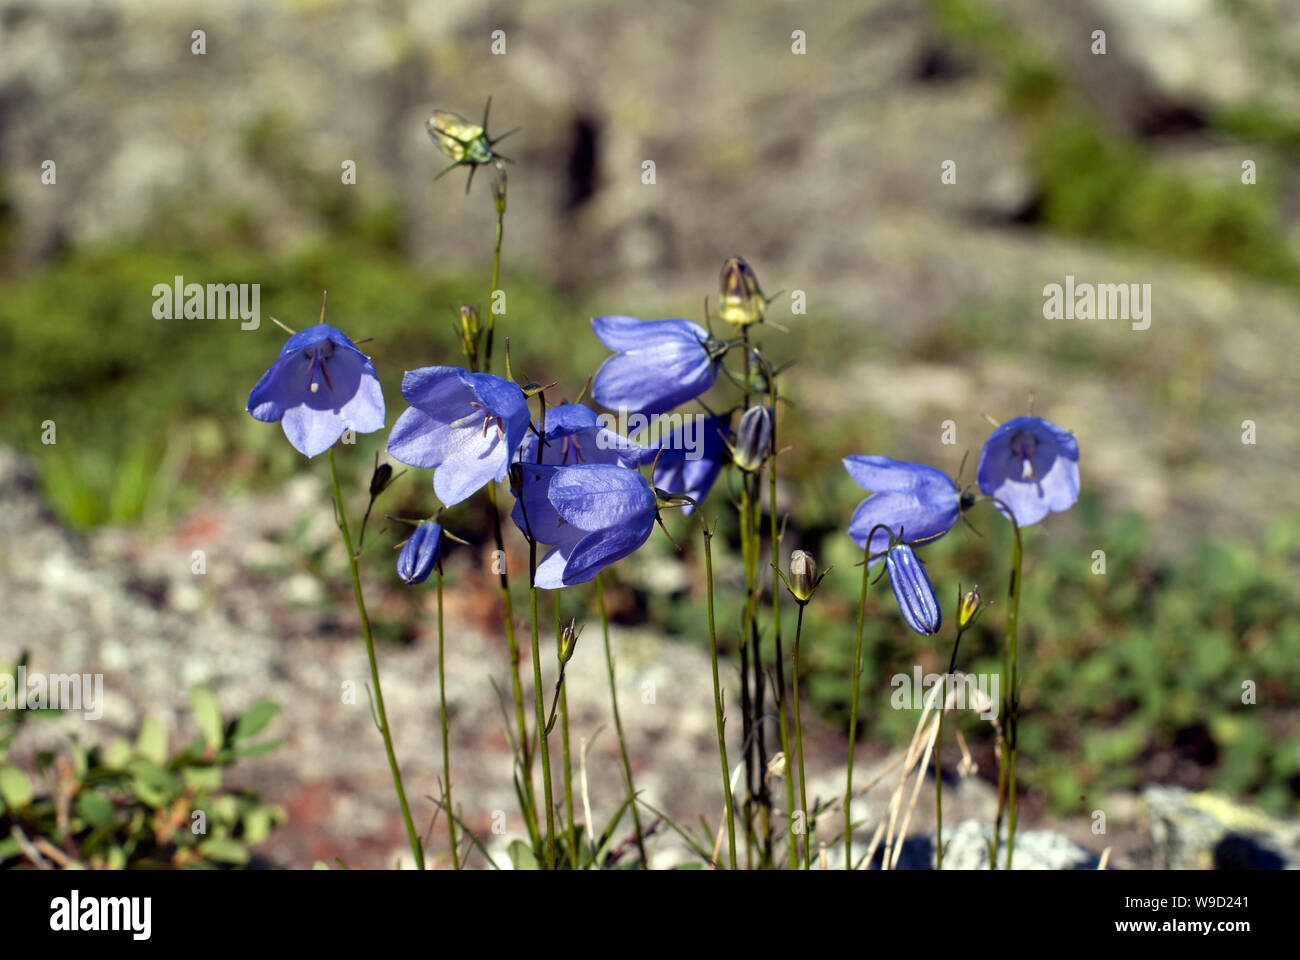 light purple bellflowers on a blurred background Stock Photo